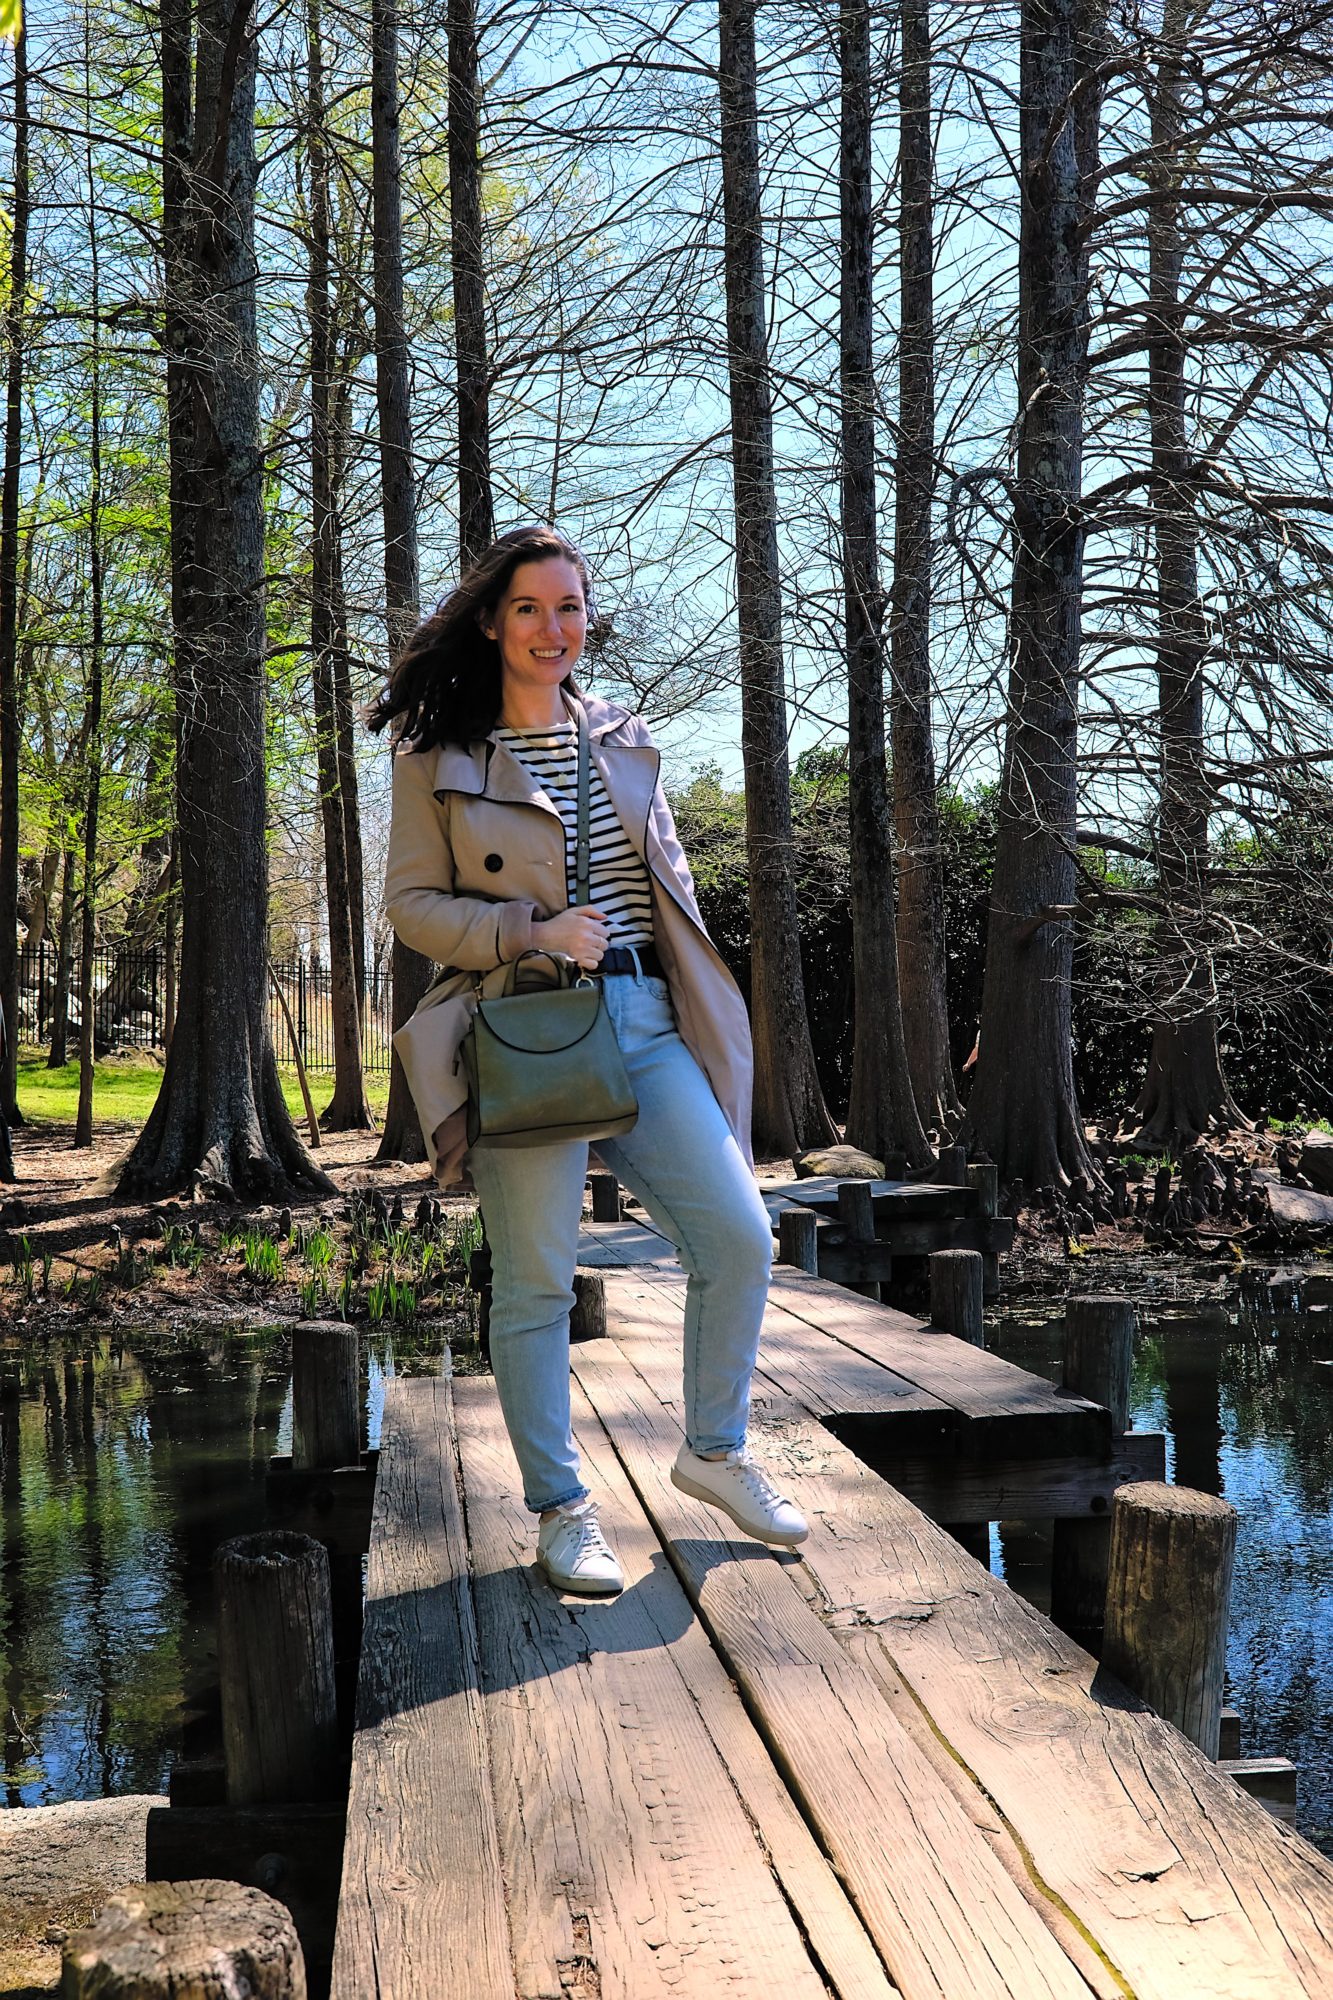 Alyssa wears a Breton top with jeans and a trench